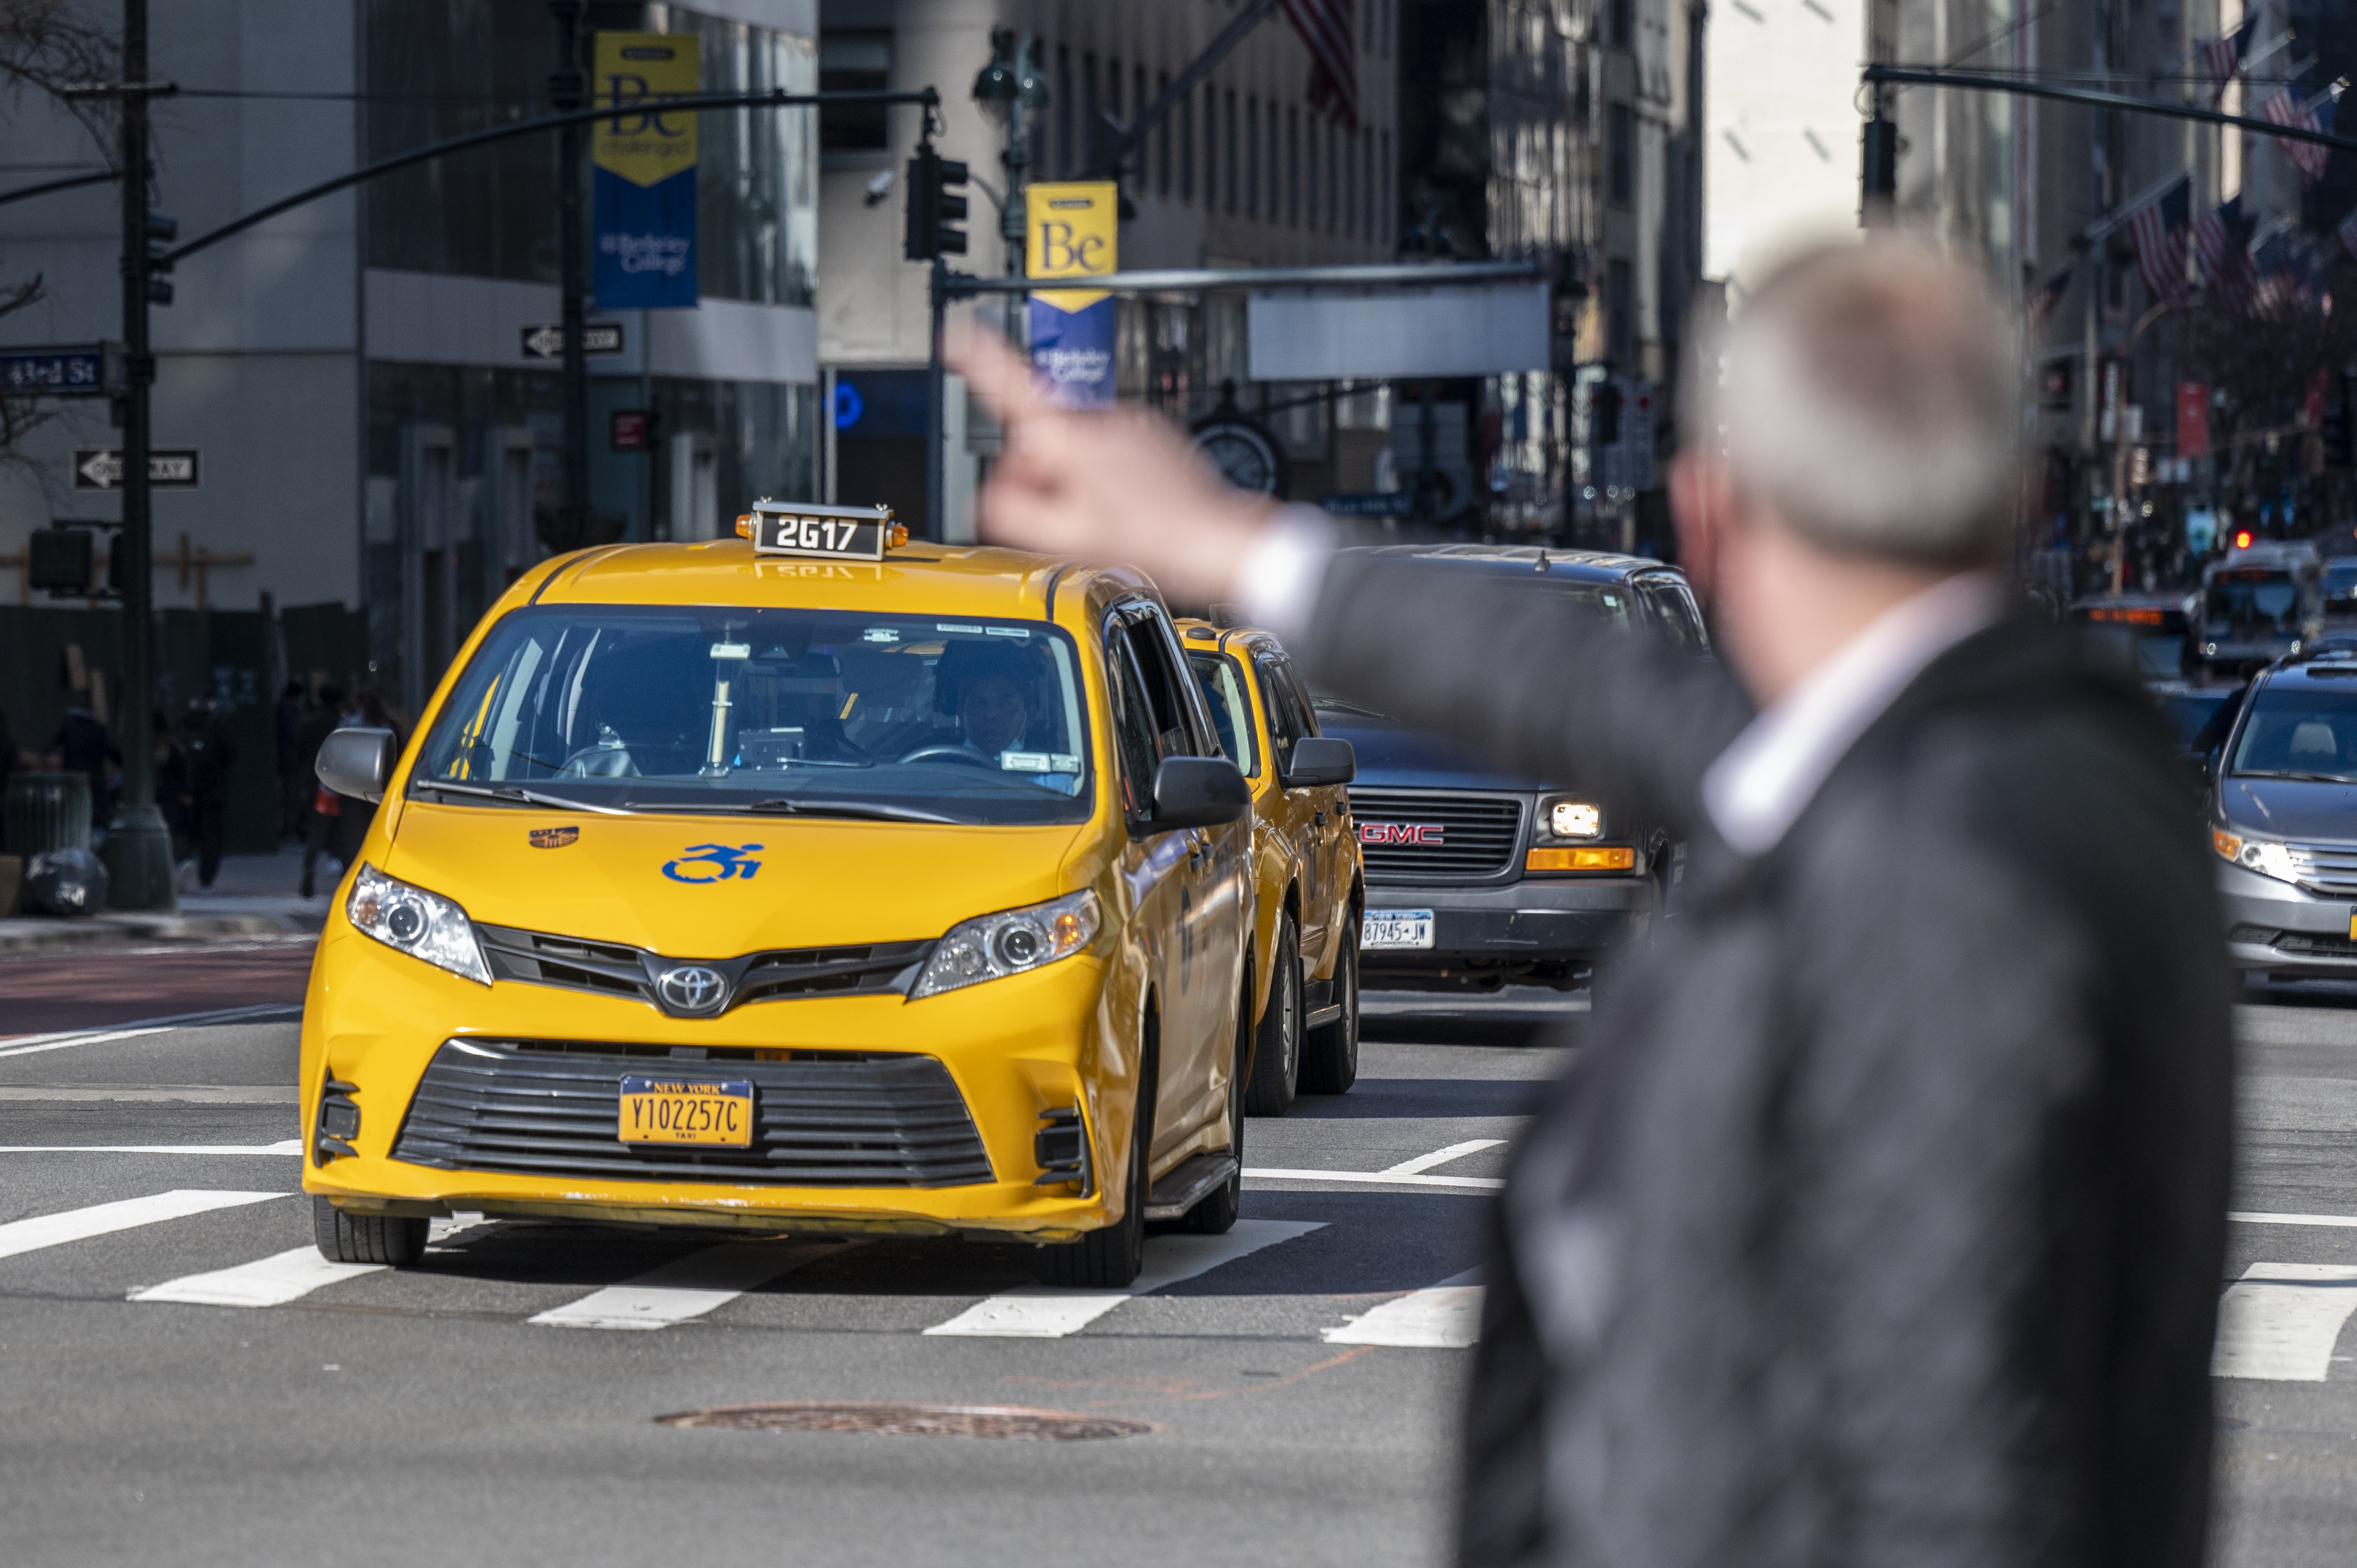 A commuter hailing a cab at the intersection of 5th Ave and E 42 St.